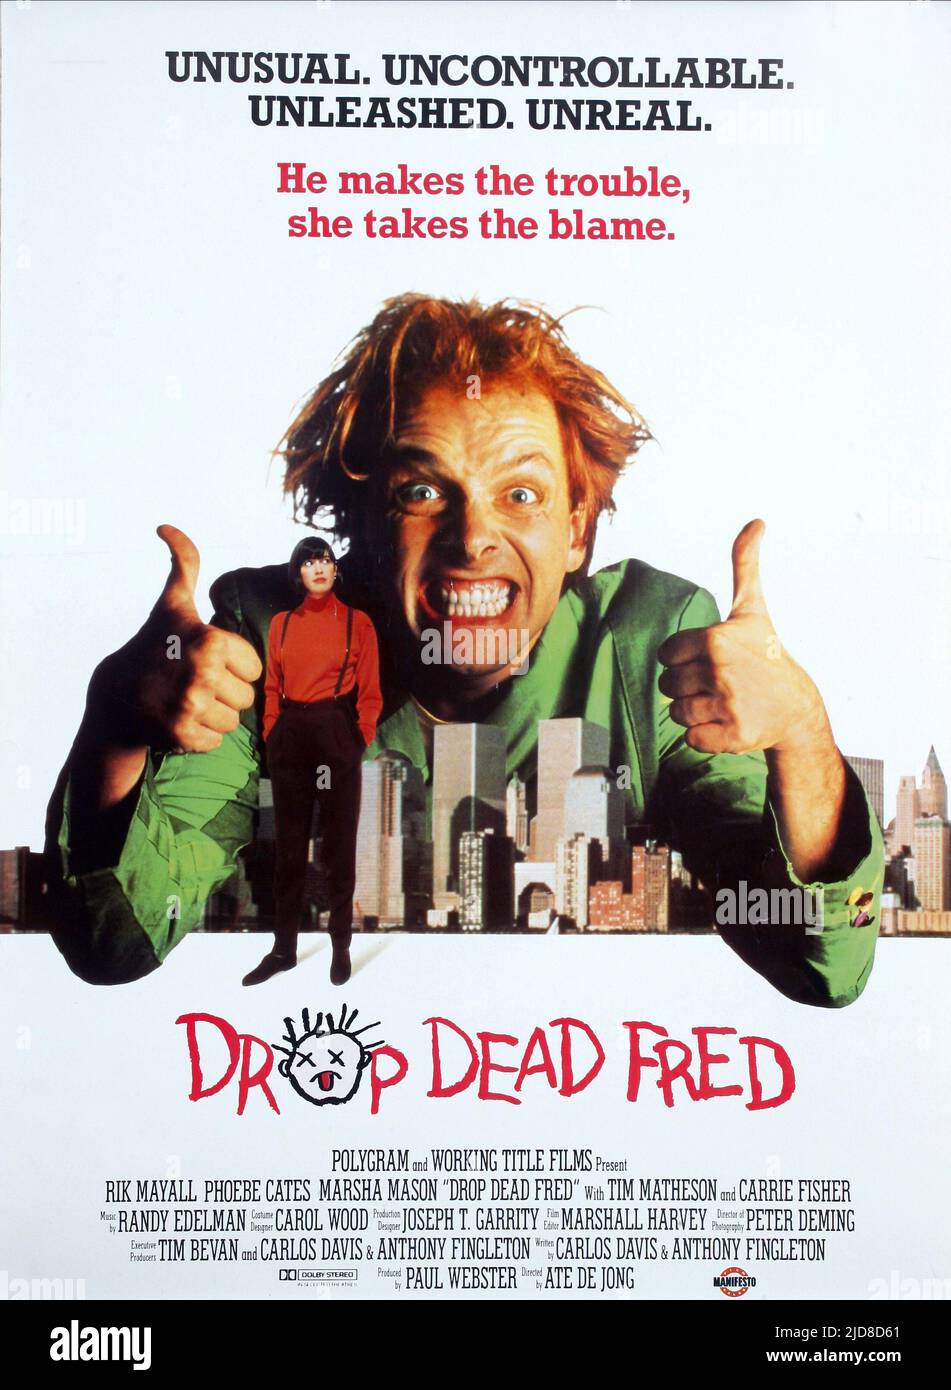 CATES, Poster, DROP DEAD FRED, 1991 Stockfoto